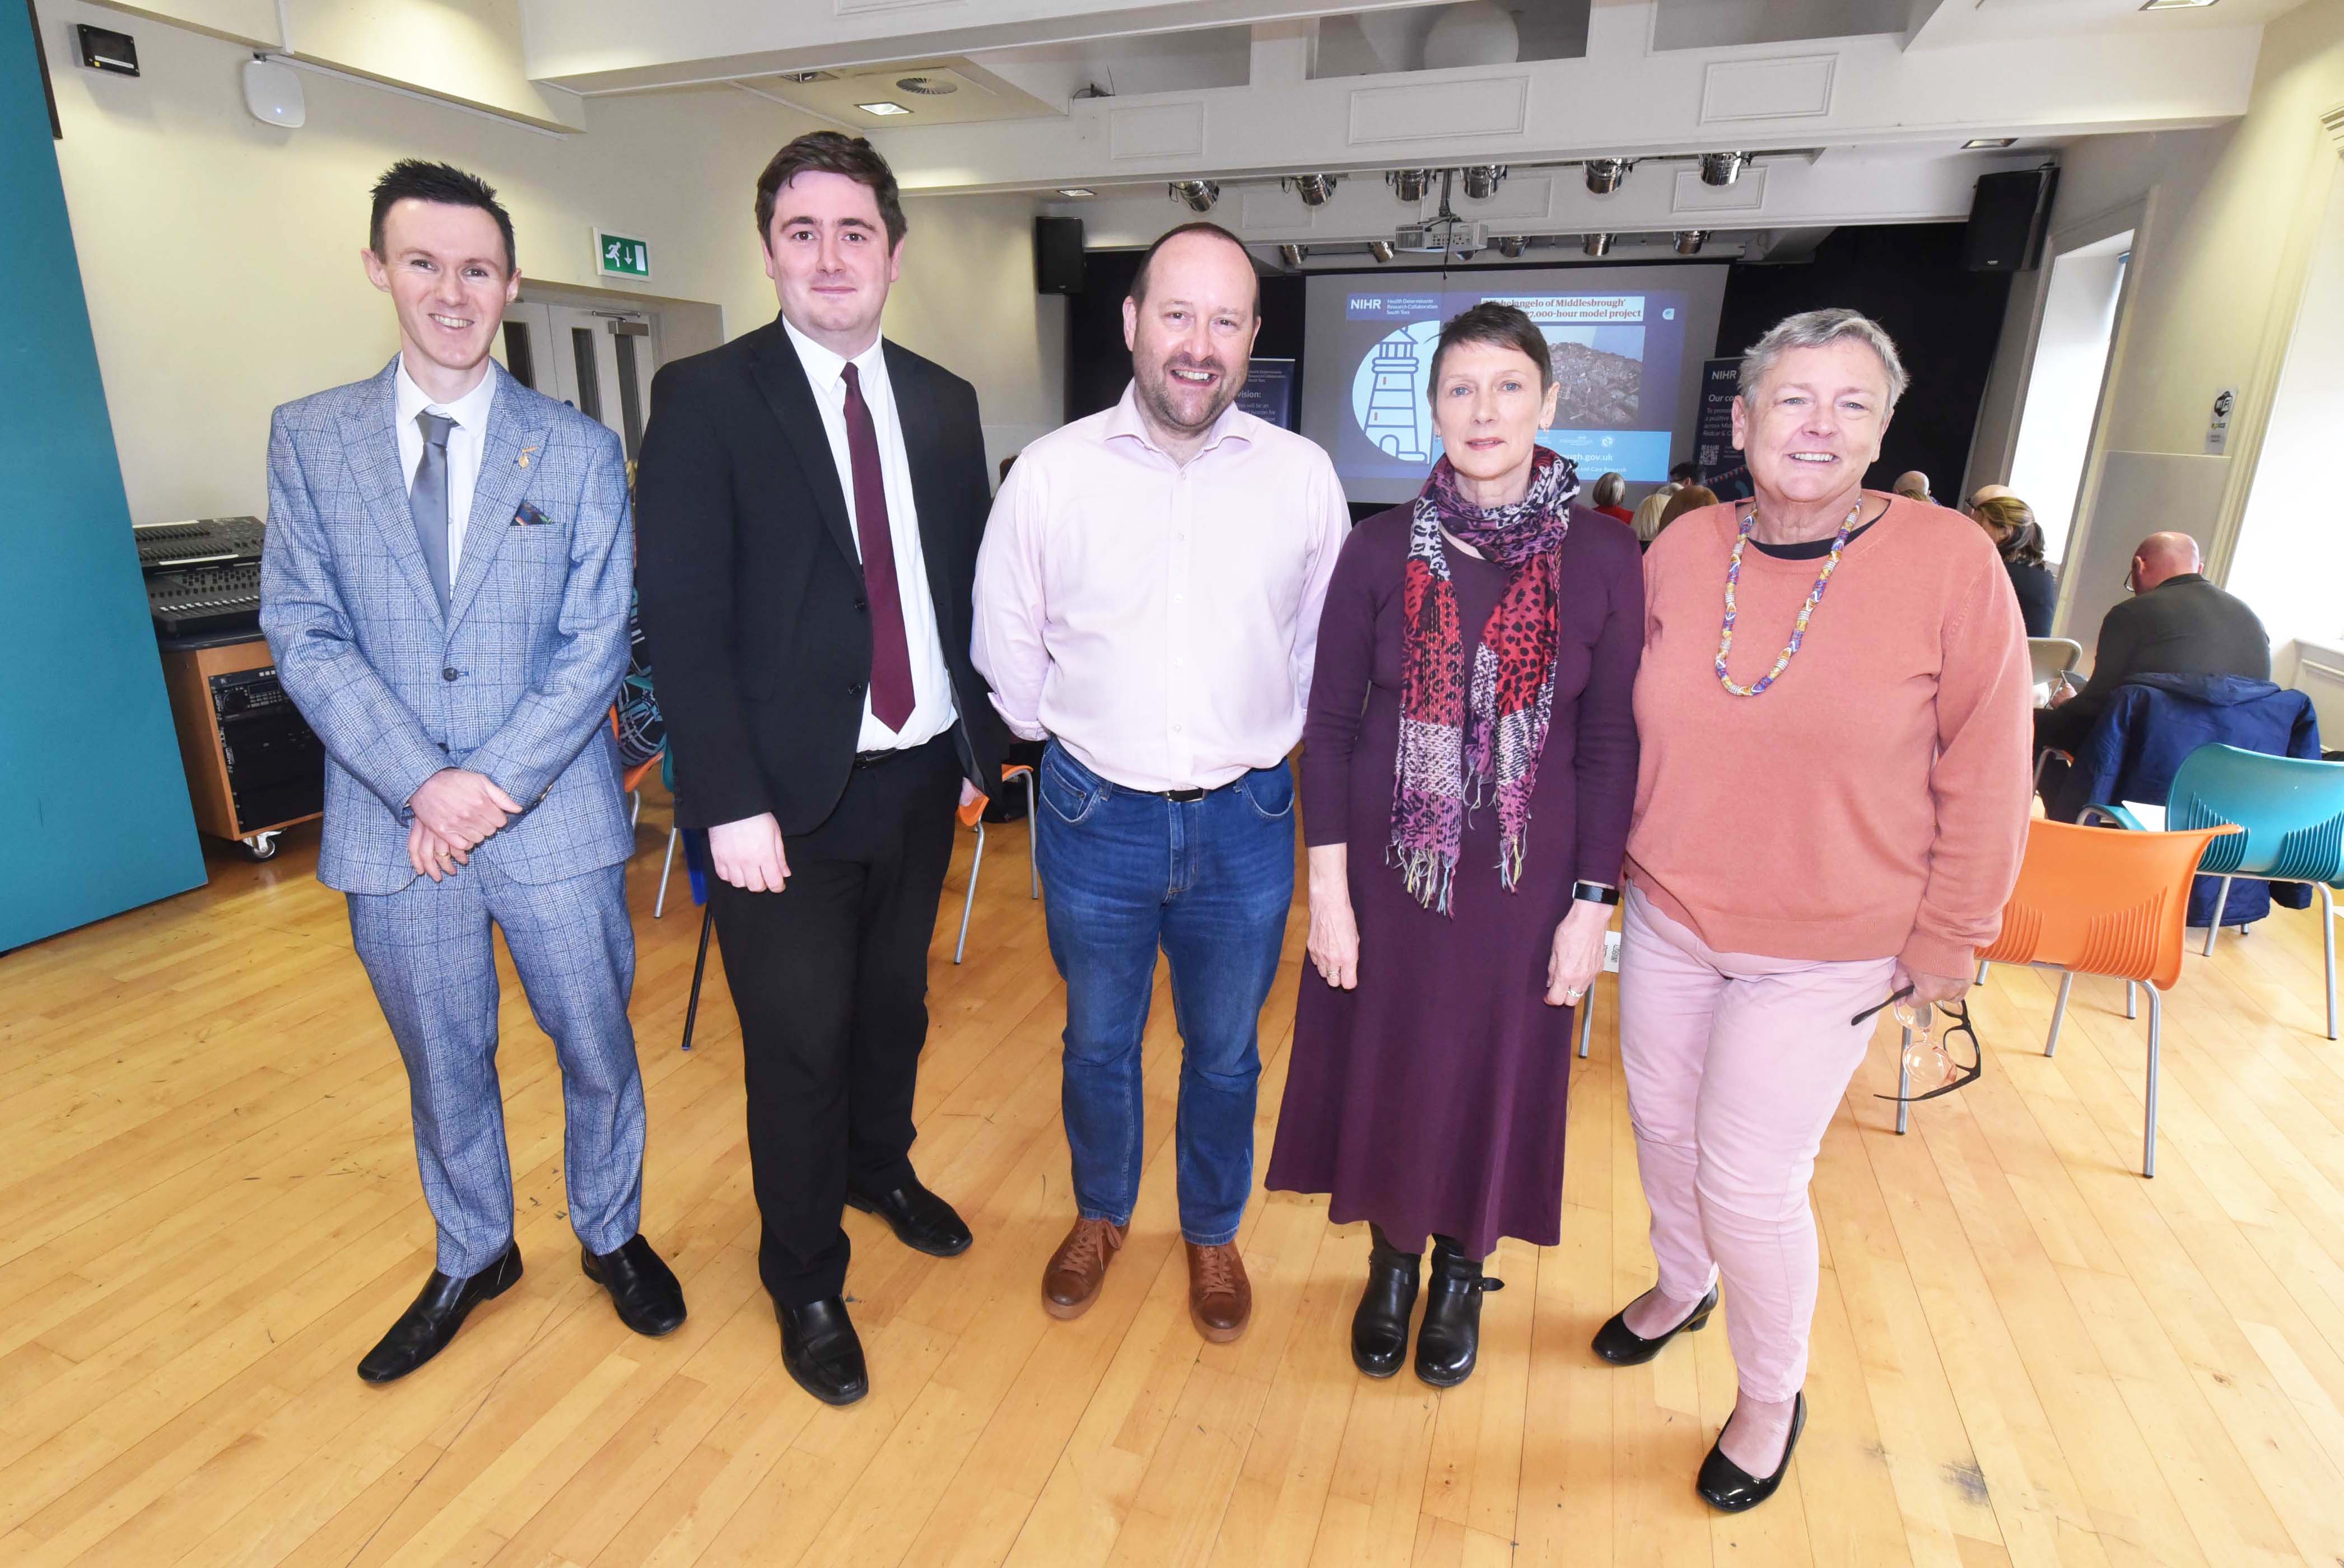 Scott Lloyd, Mayor Chris Cooke, Director of Public Health Mark Adams, Jan Lecouturier, Head of Knowledge and Innovation and Dorothy Newbury-Birch, Professor of Social Justice and Public Policy